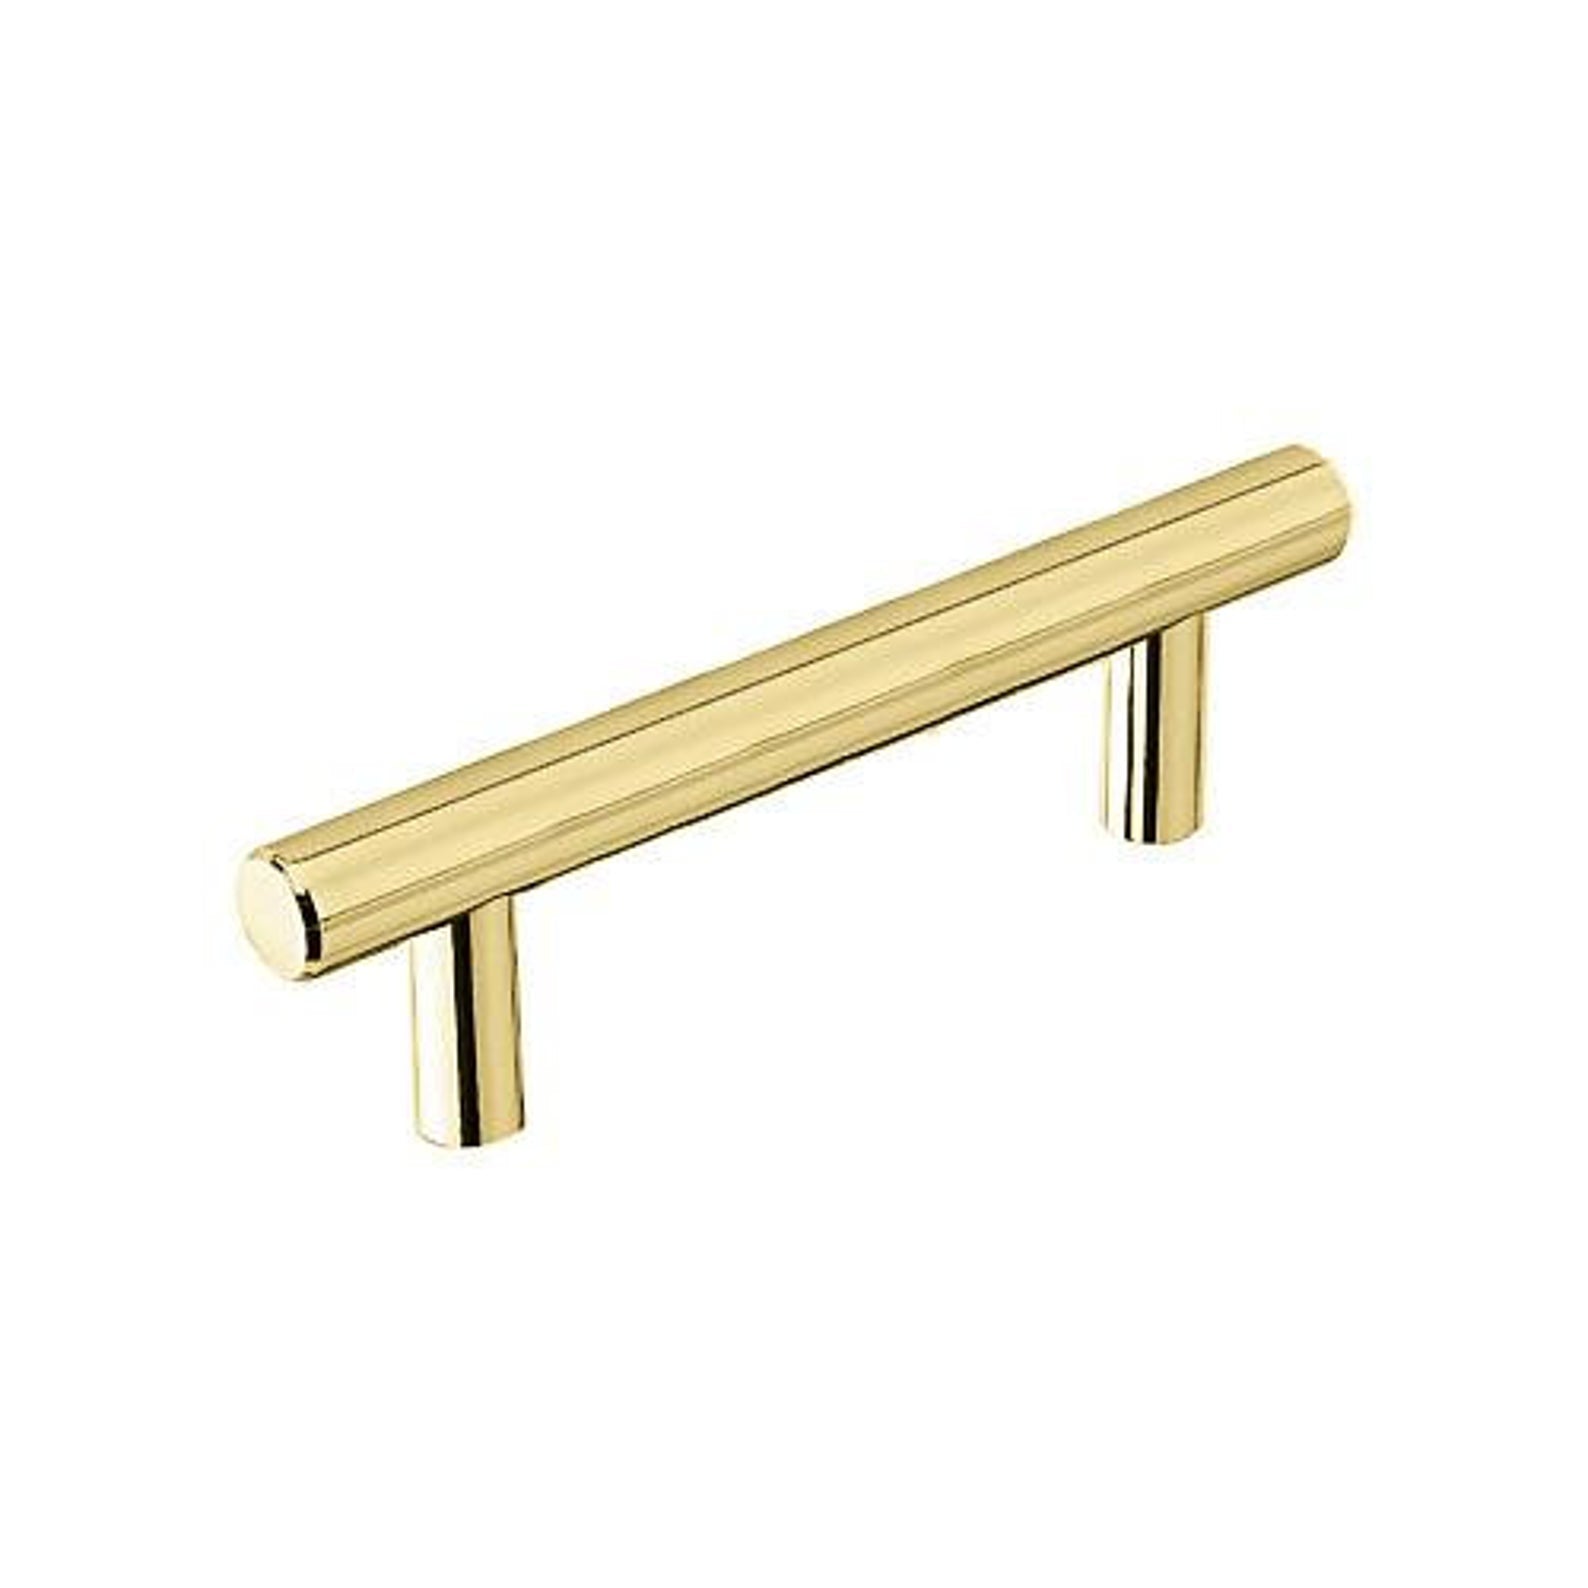 T-Bar "European" Unlacquered Polished Brass Cabinet Knobs and Pulls - Industry Hardware